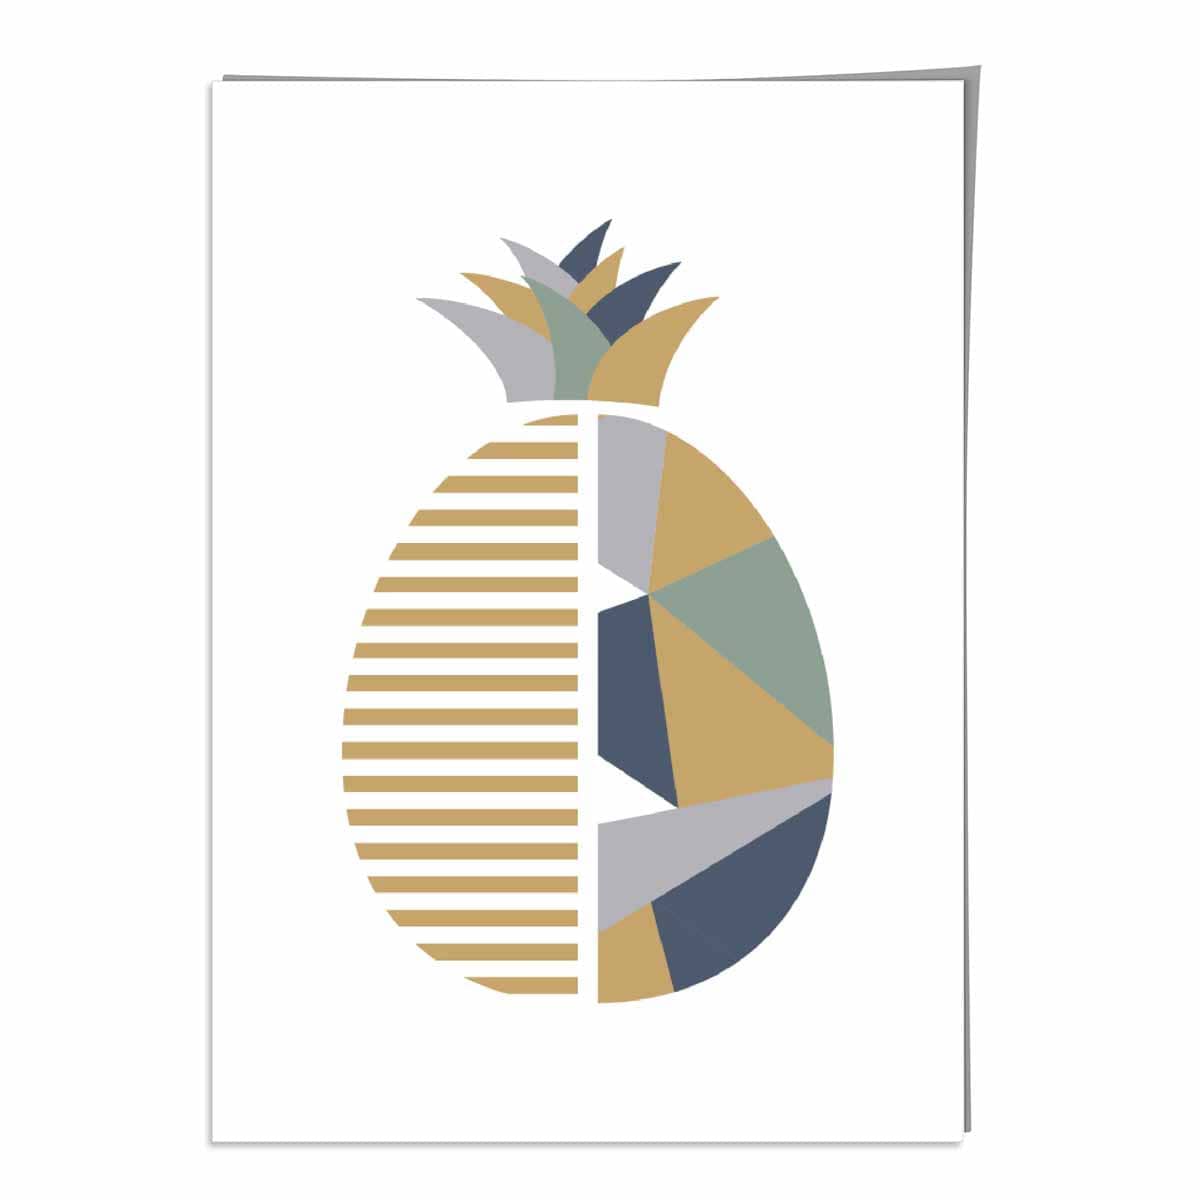 Geometric Fruit Poster of a Pineapple in Sage Green Blue Yellow